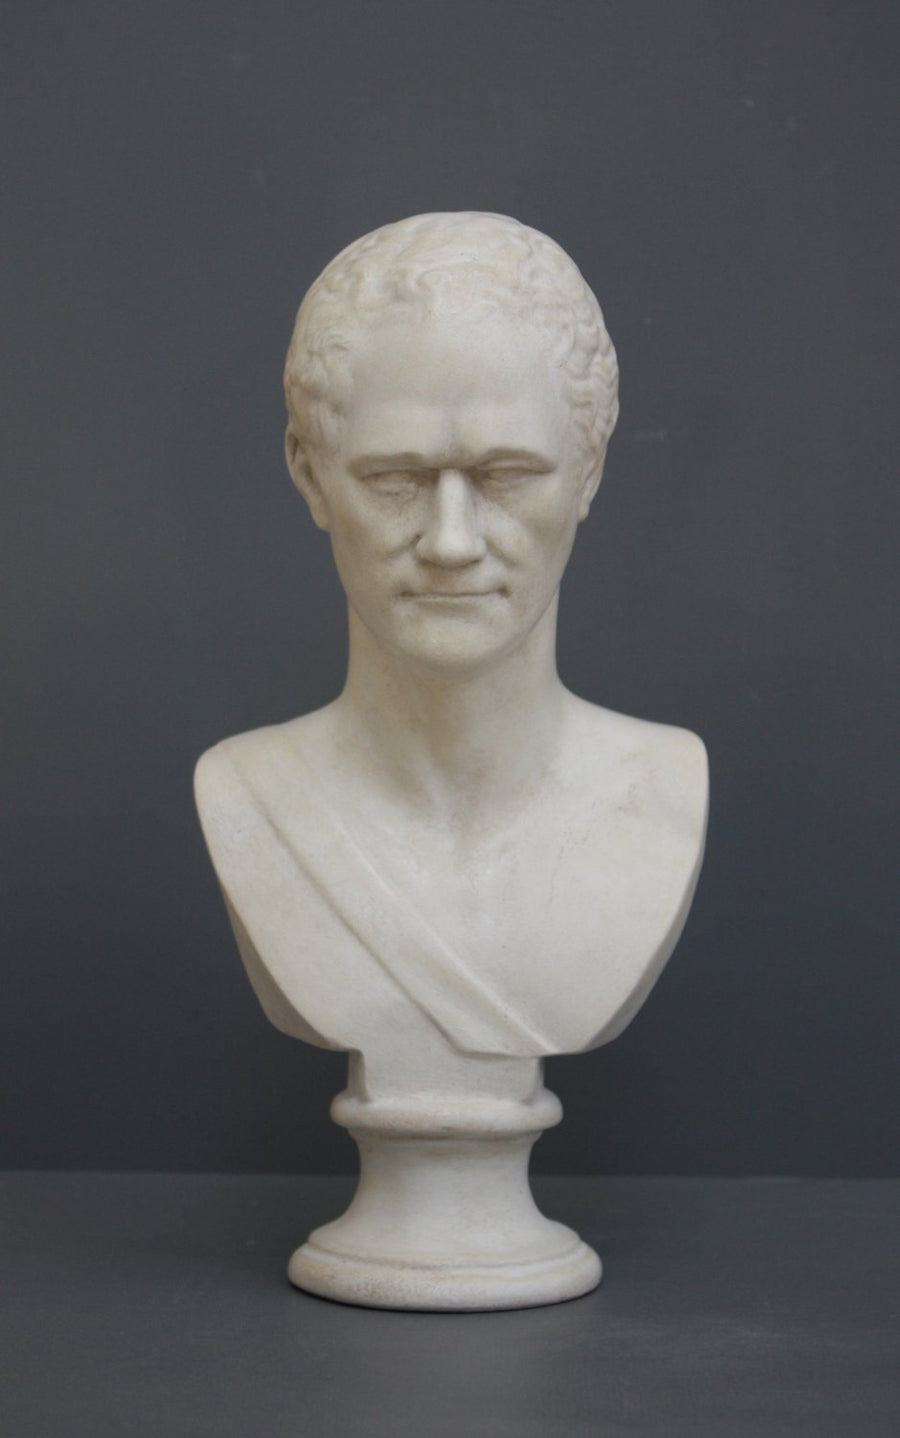 photo of white plaster cast bust of man, namely Alexander Hamilton, against gray background